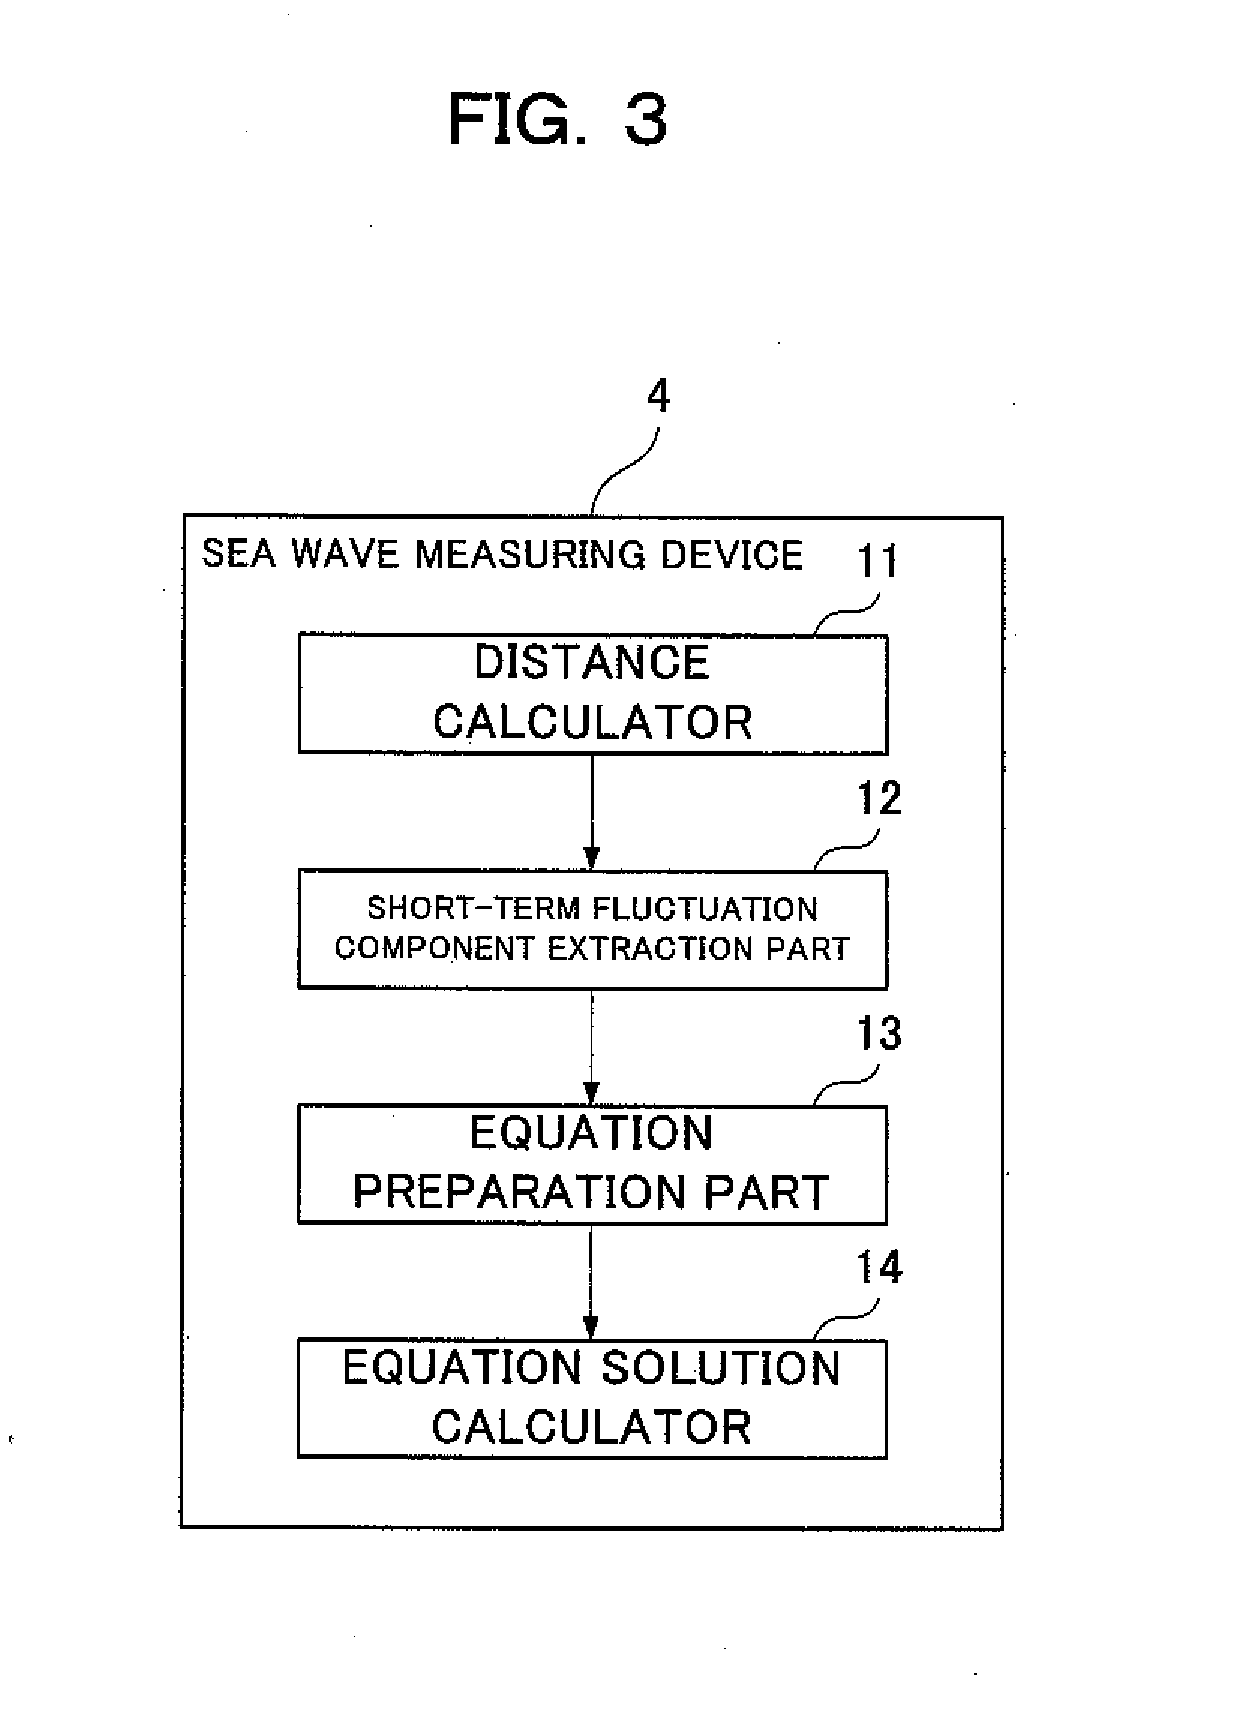 Method for measuring sea waves by means of ultrasonic waves, as well as sea wave measuring system